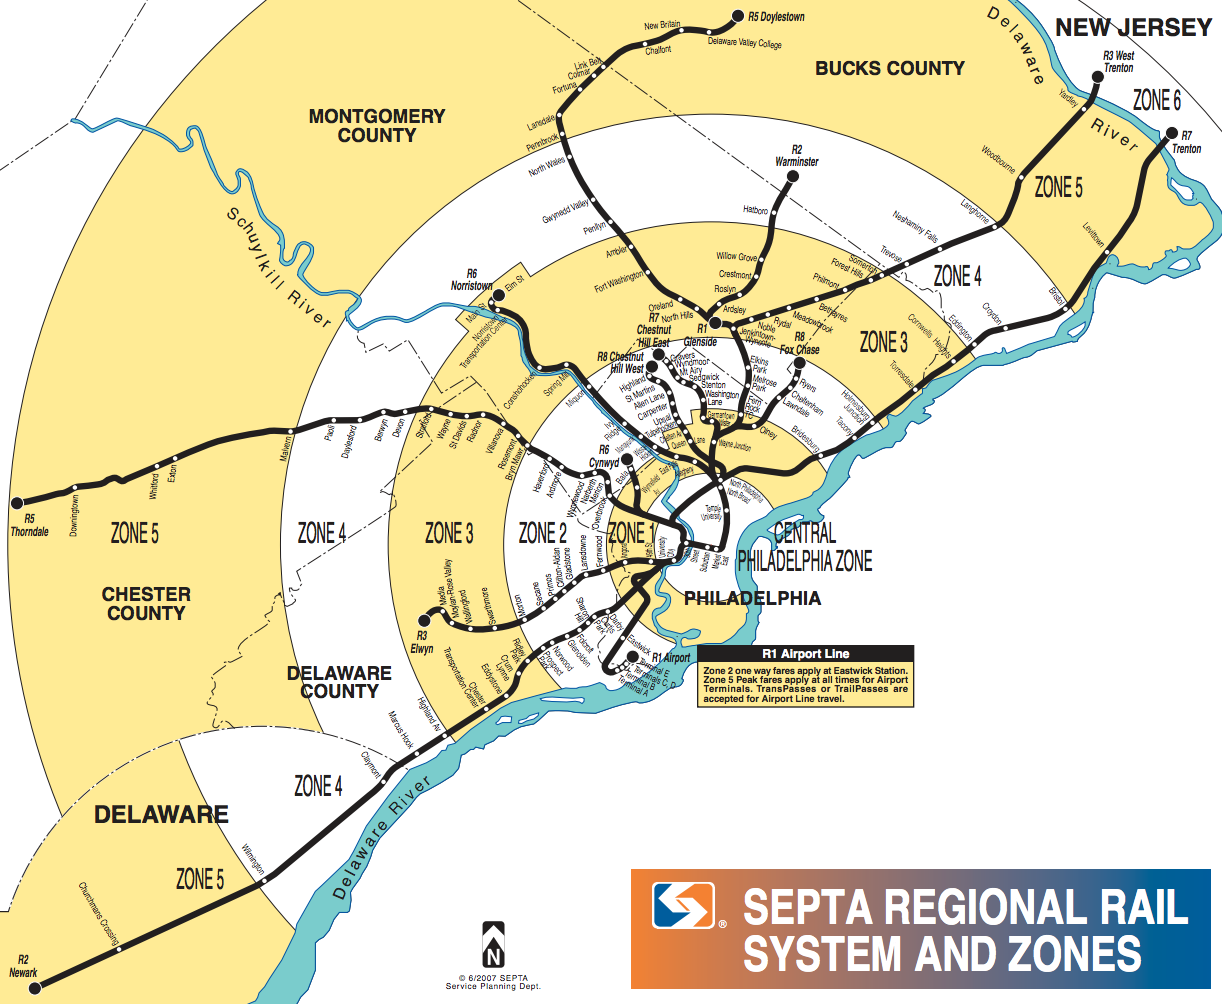 Current SEPTA regional rail system and zones